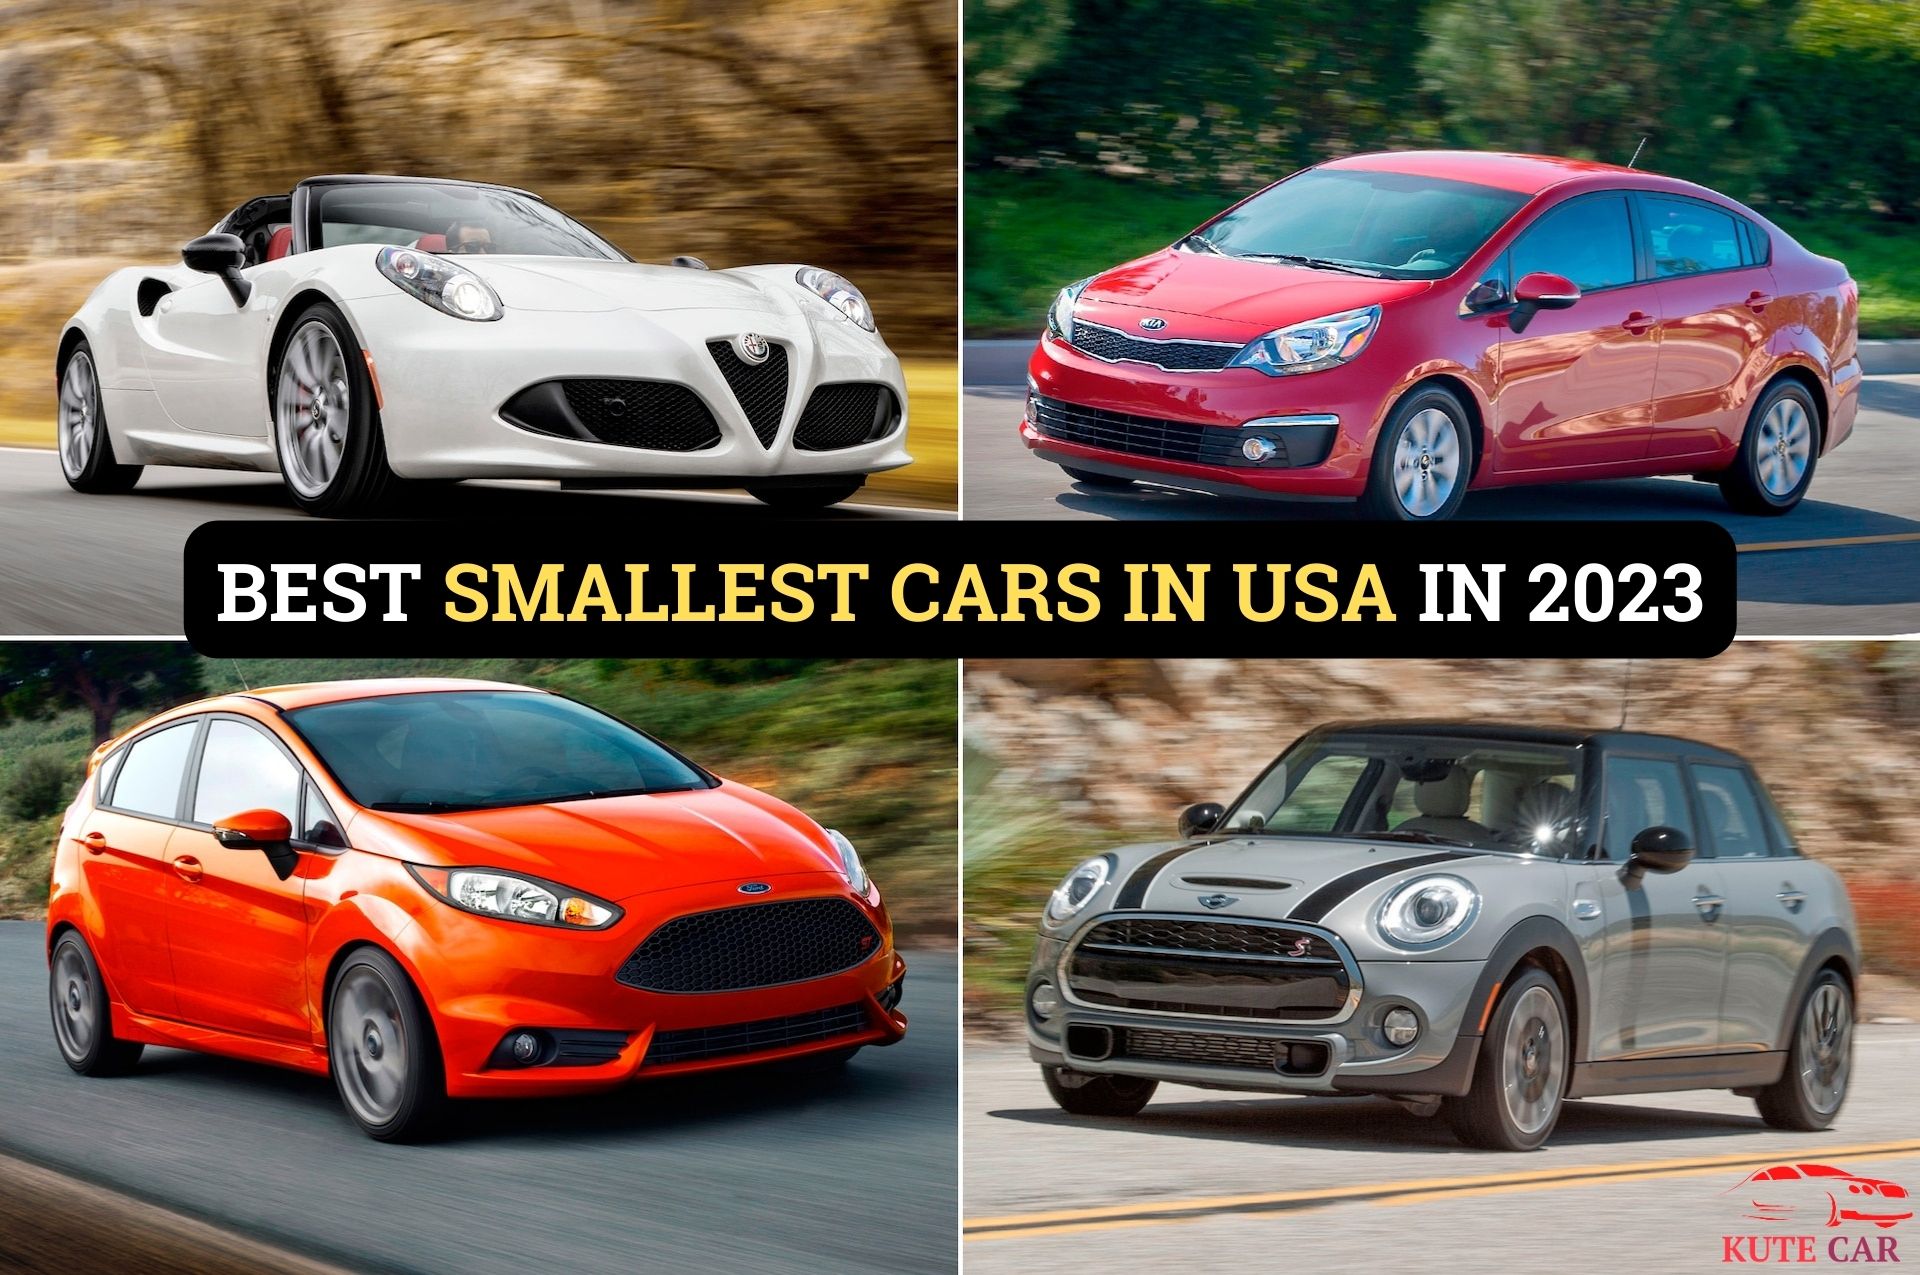 Best Smallest Cars USA